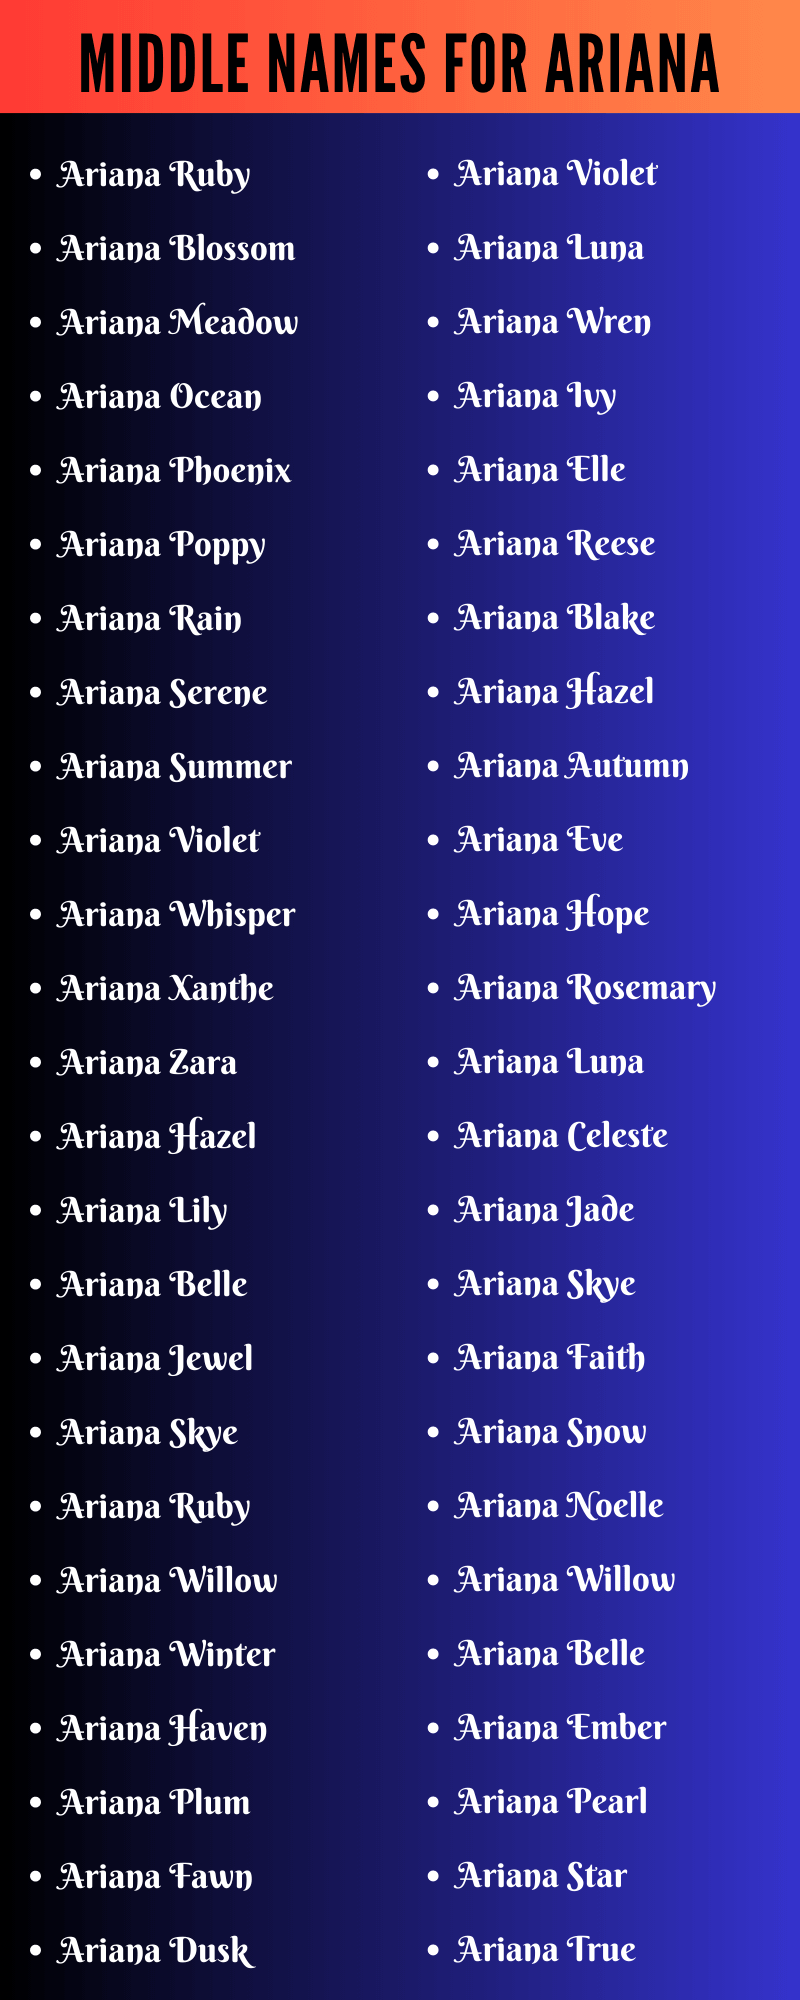 Middle Names For Ariana